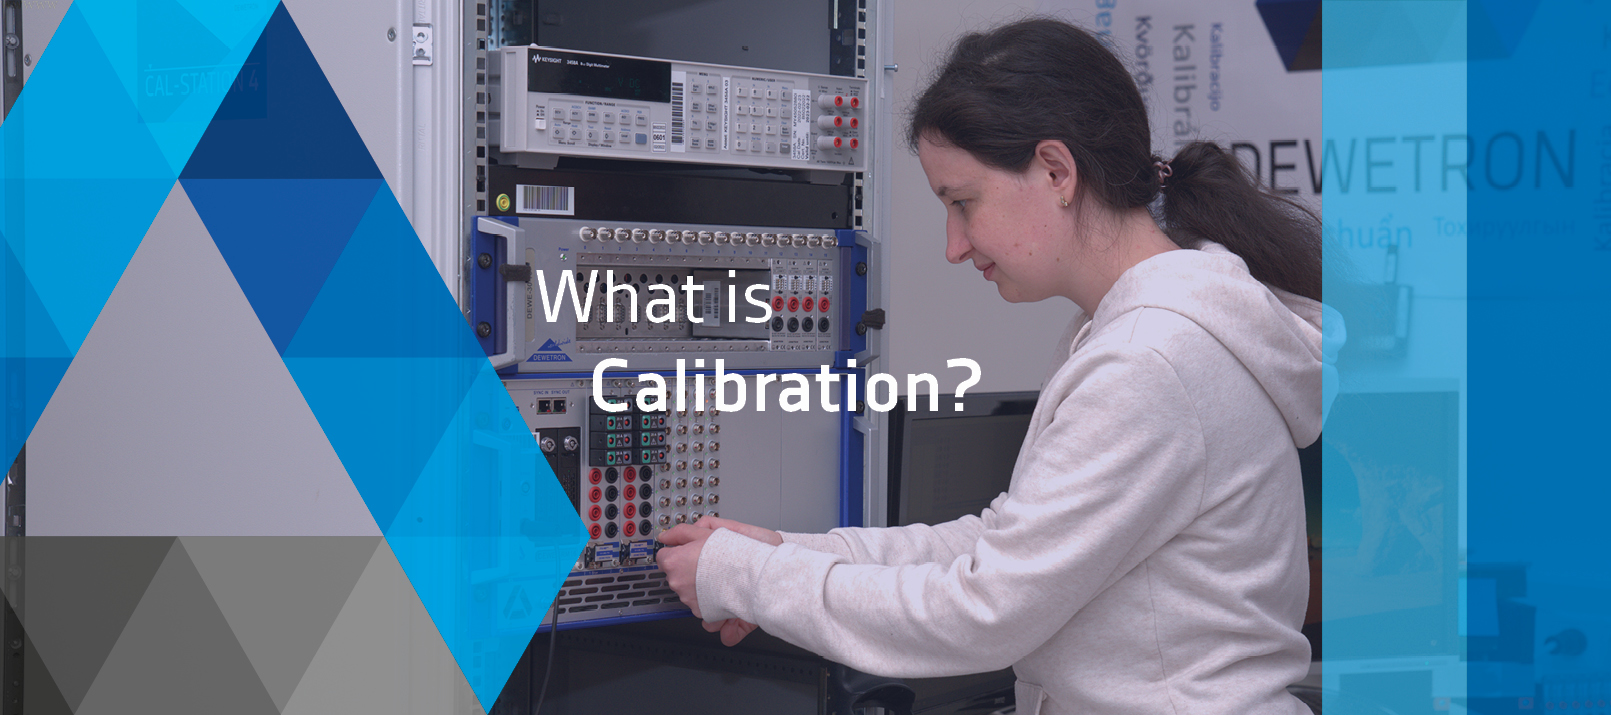 what-is calibration